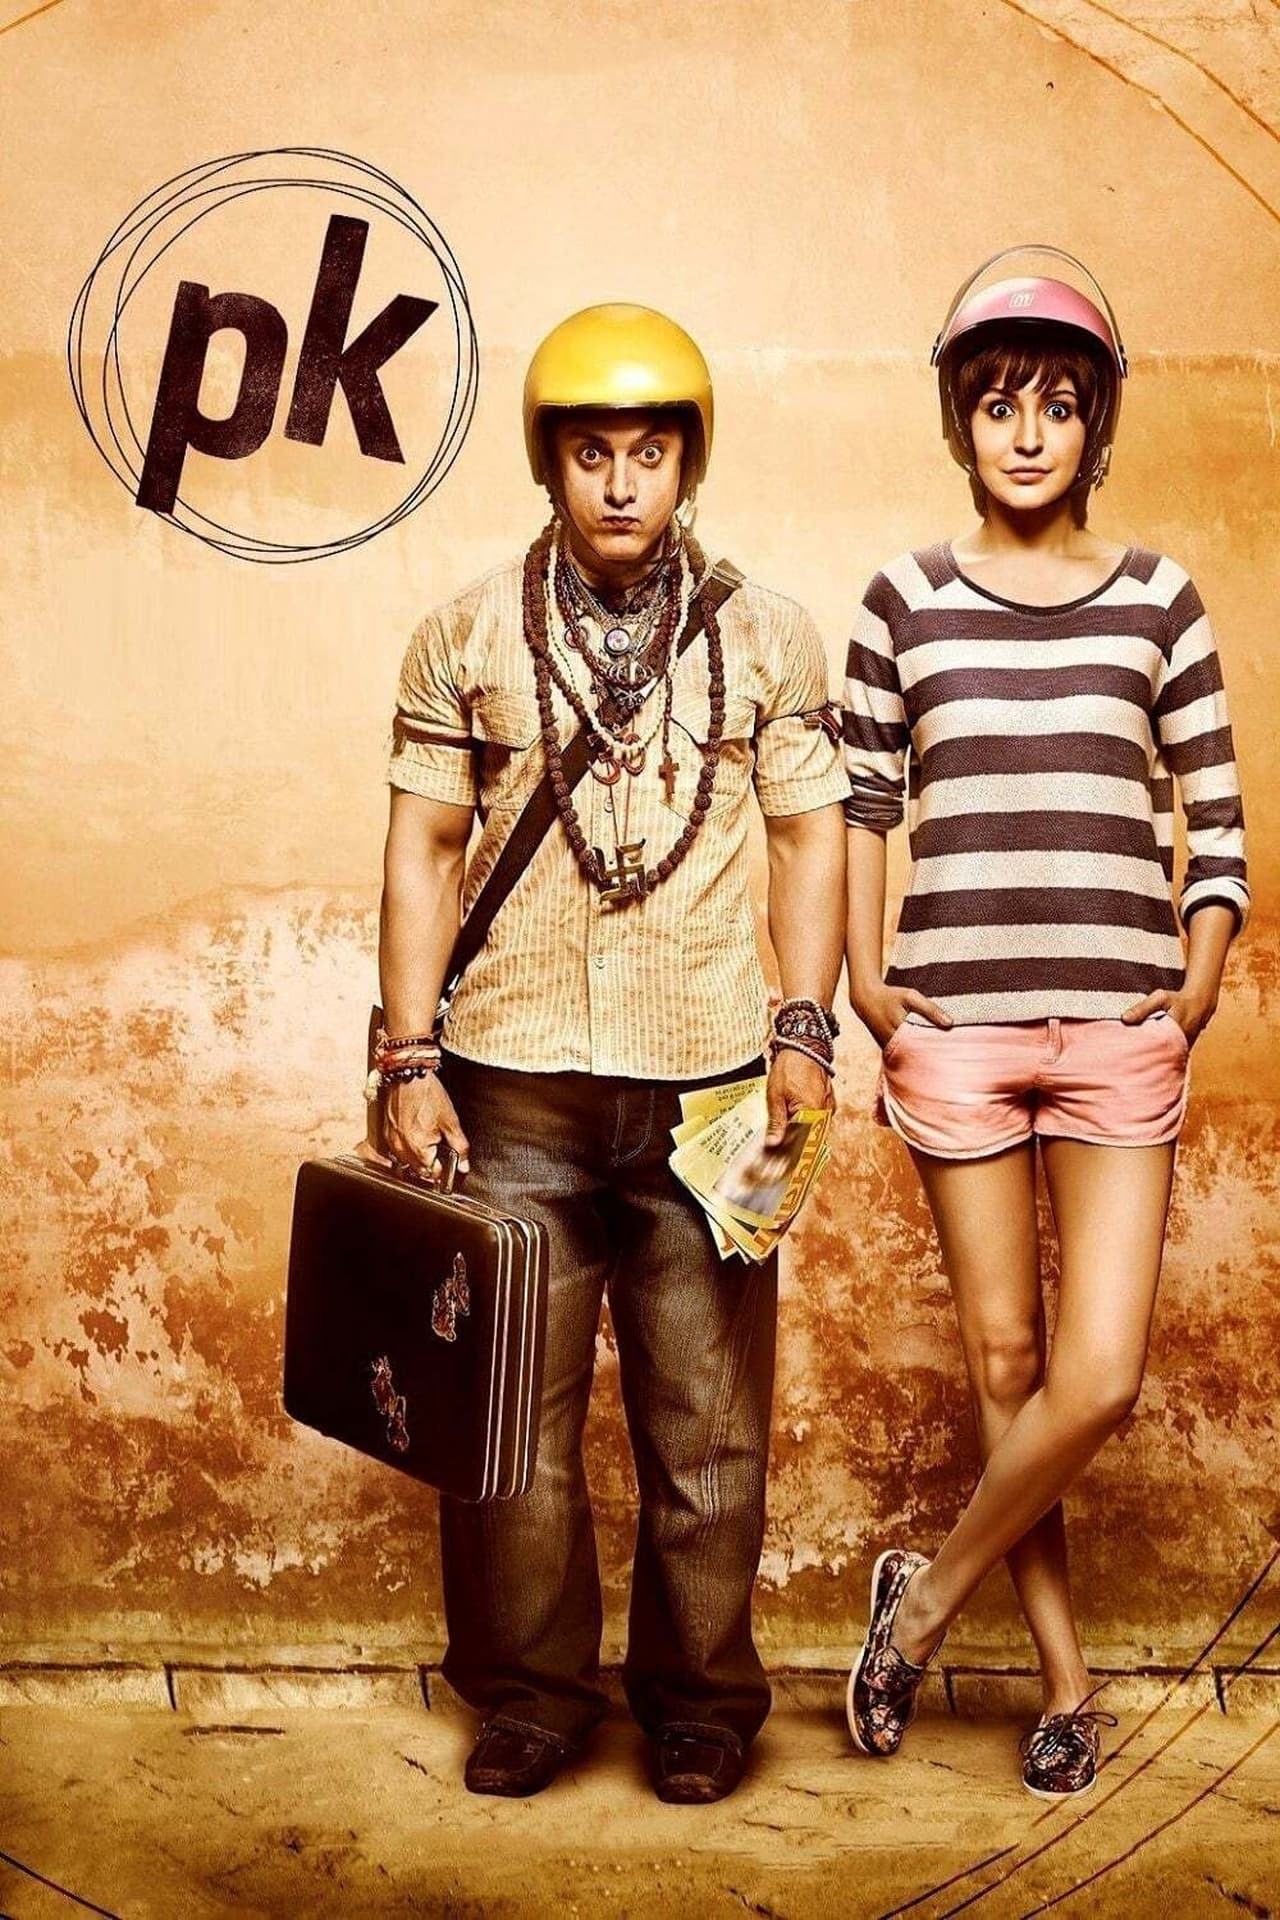 Read more about the article PK (2014) | Download Indian Movie